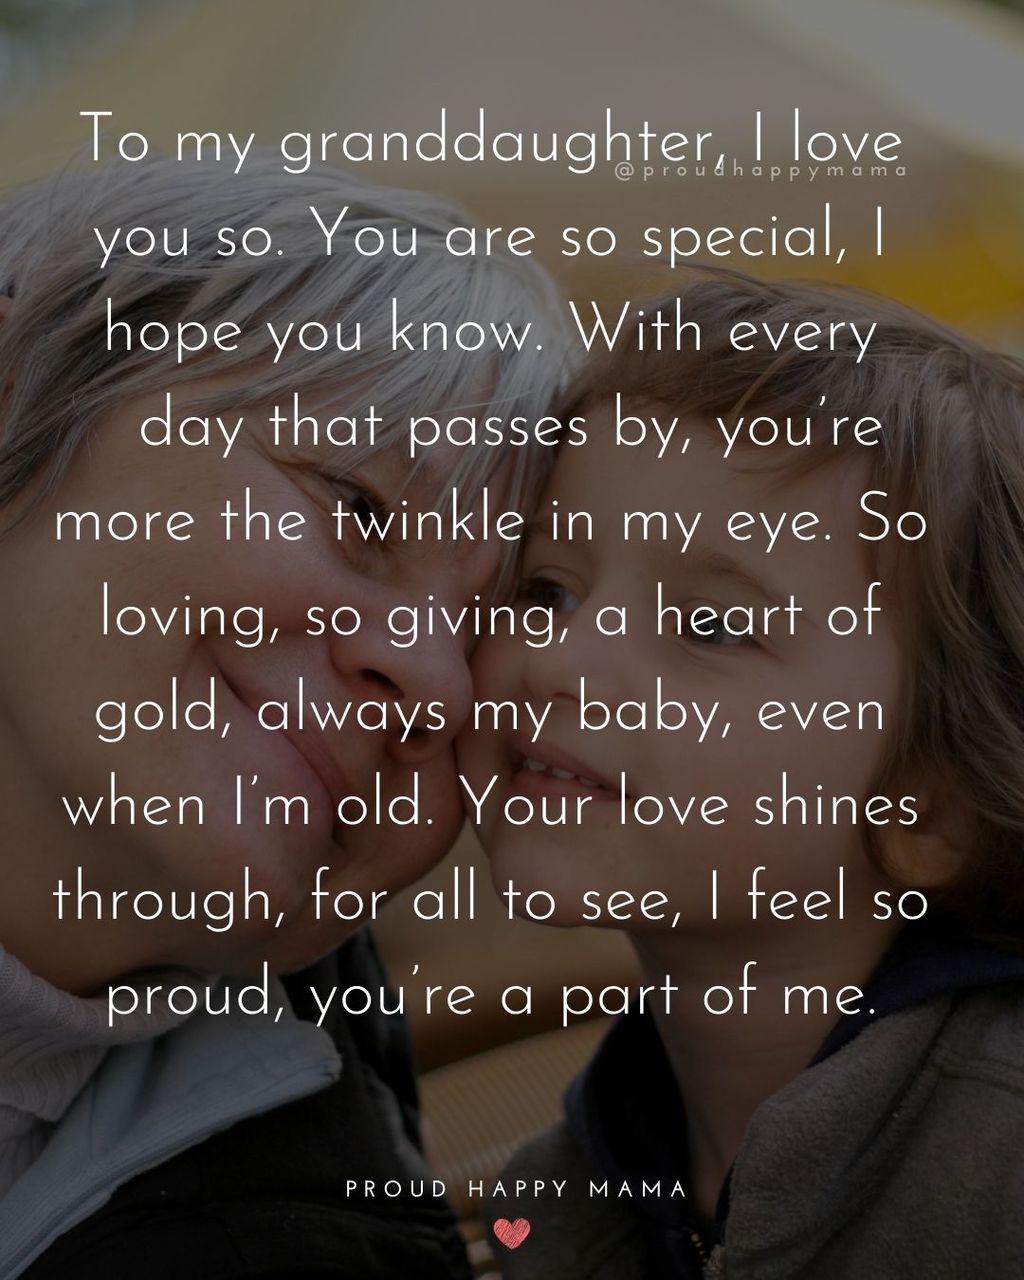 Grandma resting her head on young granddaughter's cheek smiling, with 	my beautiful granddaughter quote text overlay, ‘To my granddaughter, I love you so. You are so special, I hope you know. With every day that passes by, you’re more the twinkle in my eye. So loving, so giving, a heart of gold, always my baby, even when I’m old. Your love shines through, for all to see, I feel so proud, you’re a part of me.’ 